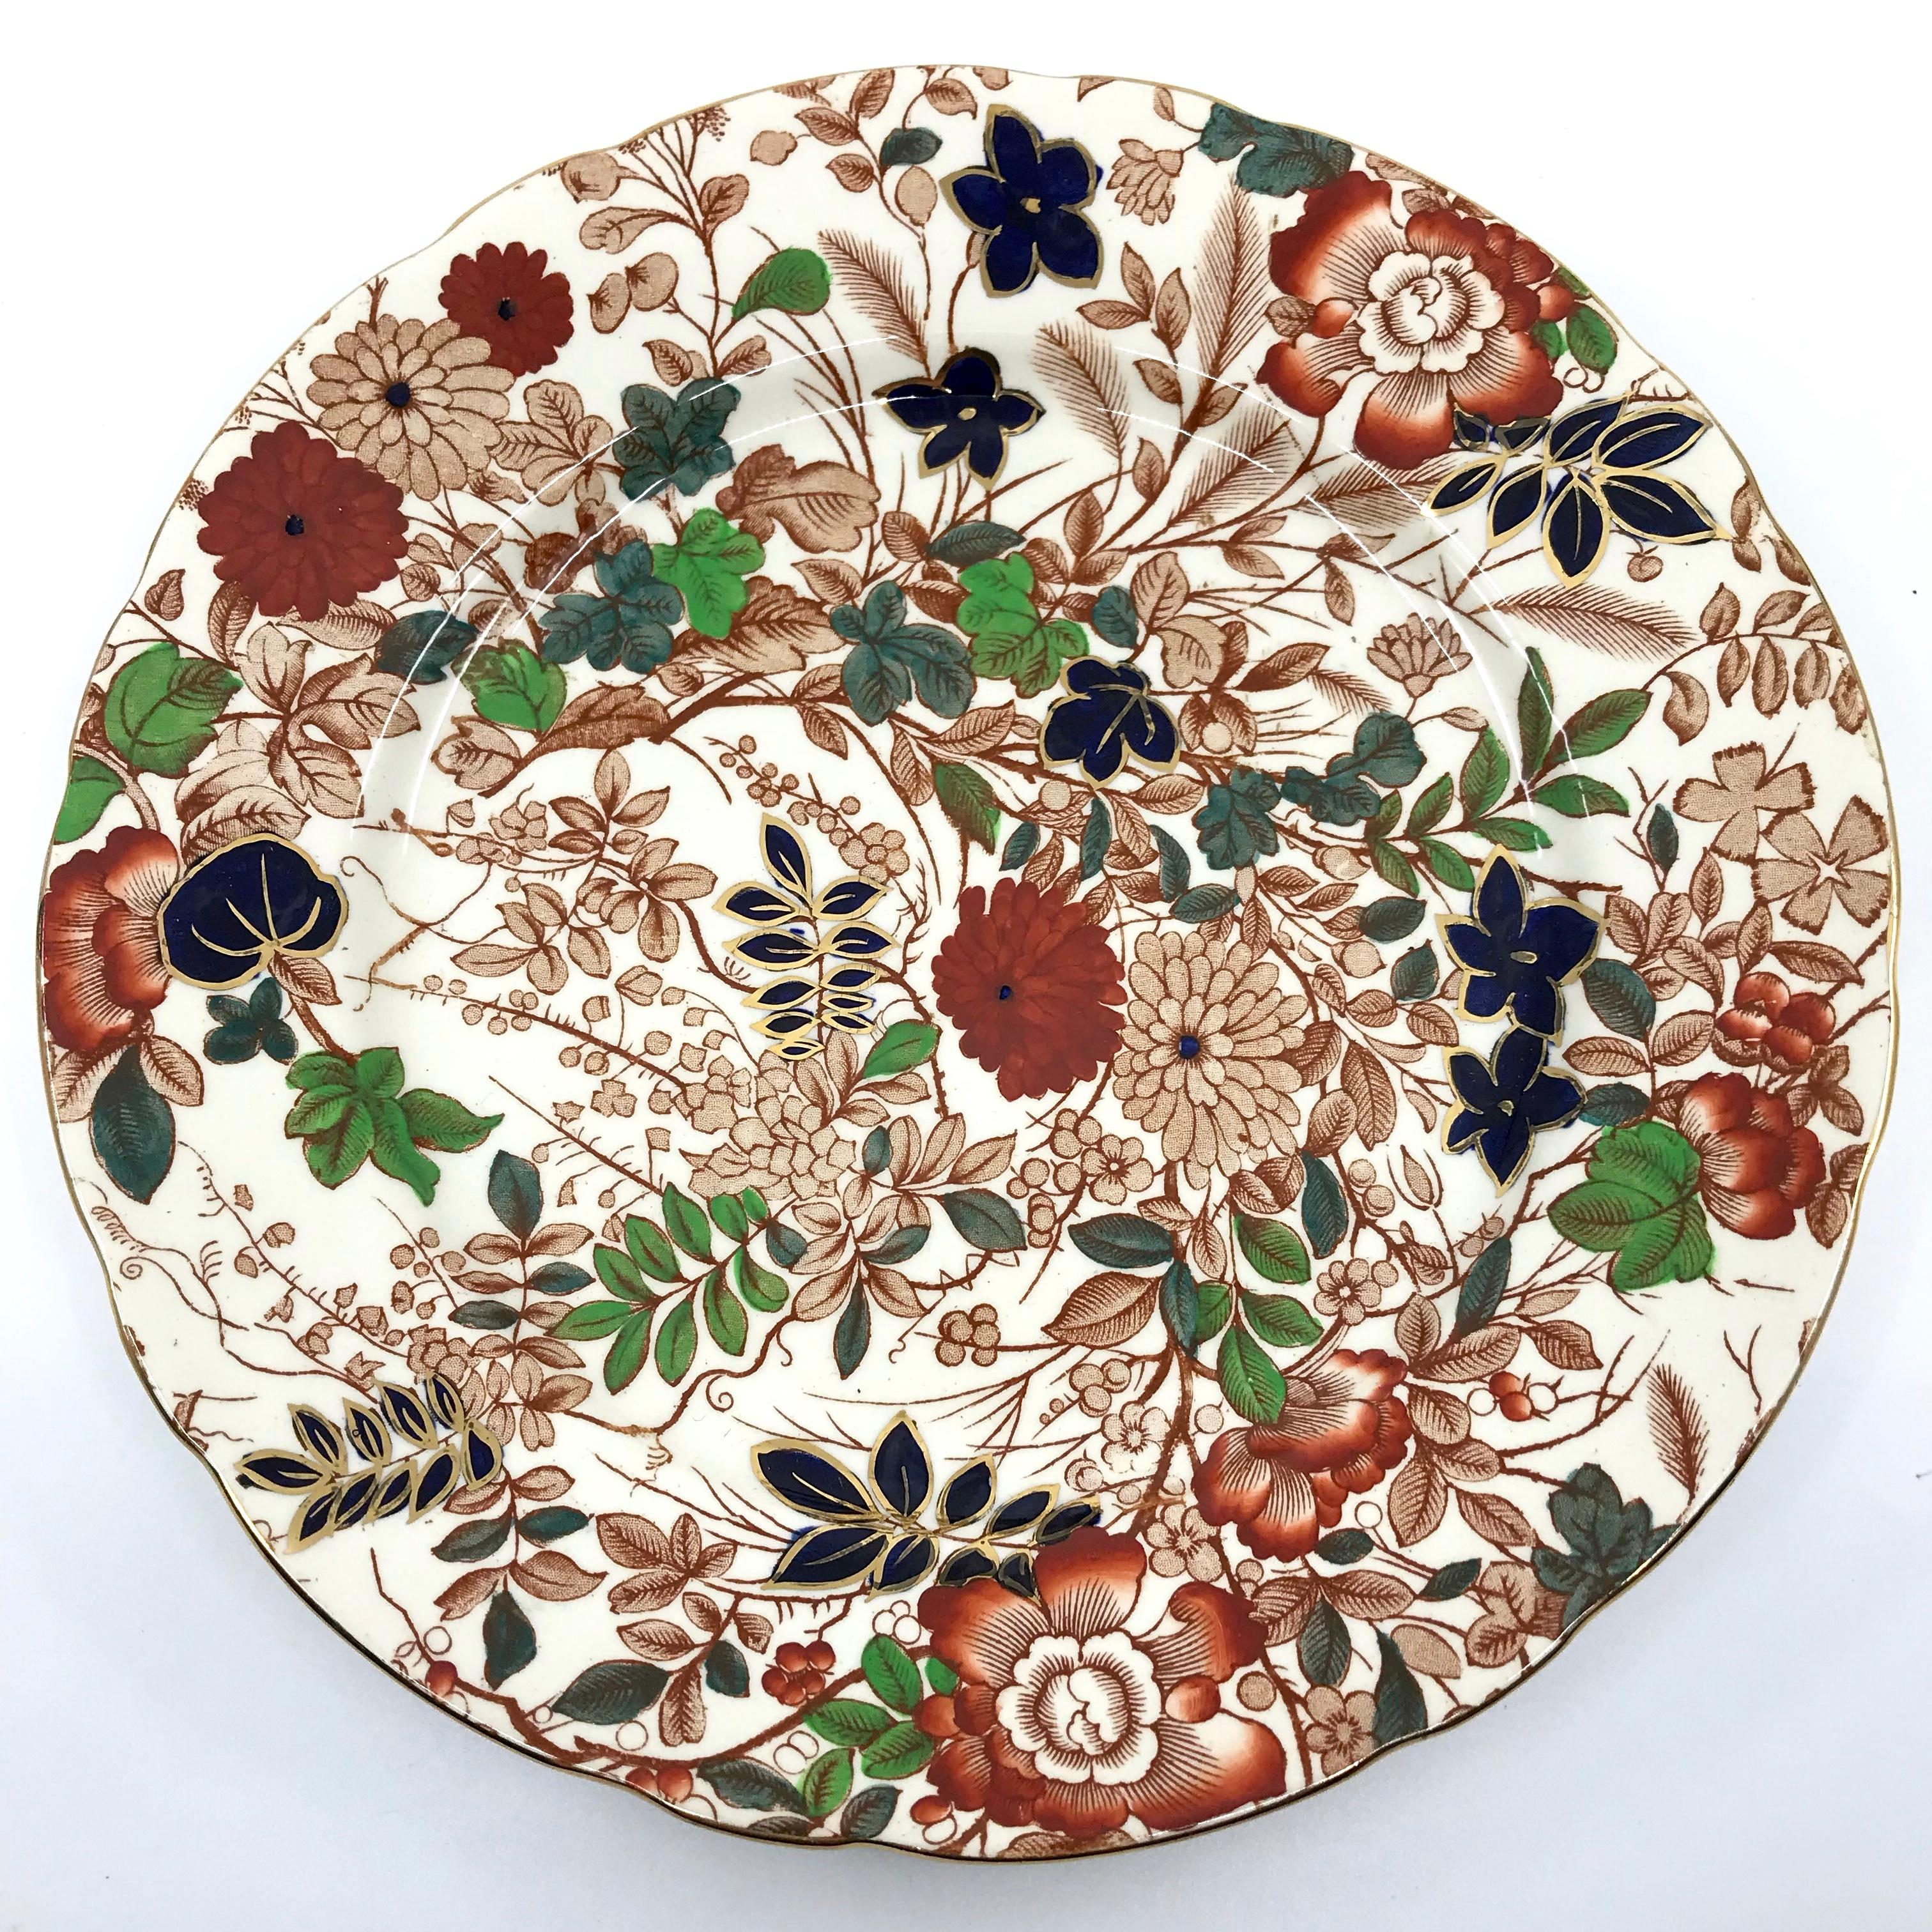 Set of six English Imari-style gilt plates. Perfect gilt-edged and lobed floral plates in Aesthetic blues, brown, green, orange and red with markings for Royal Cauldon. England, circa 1920’s
Dimensions: 9.5